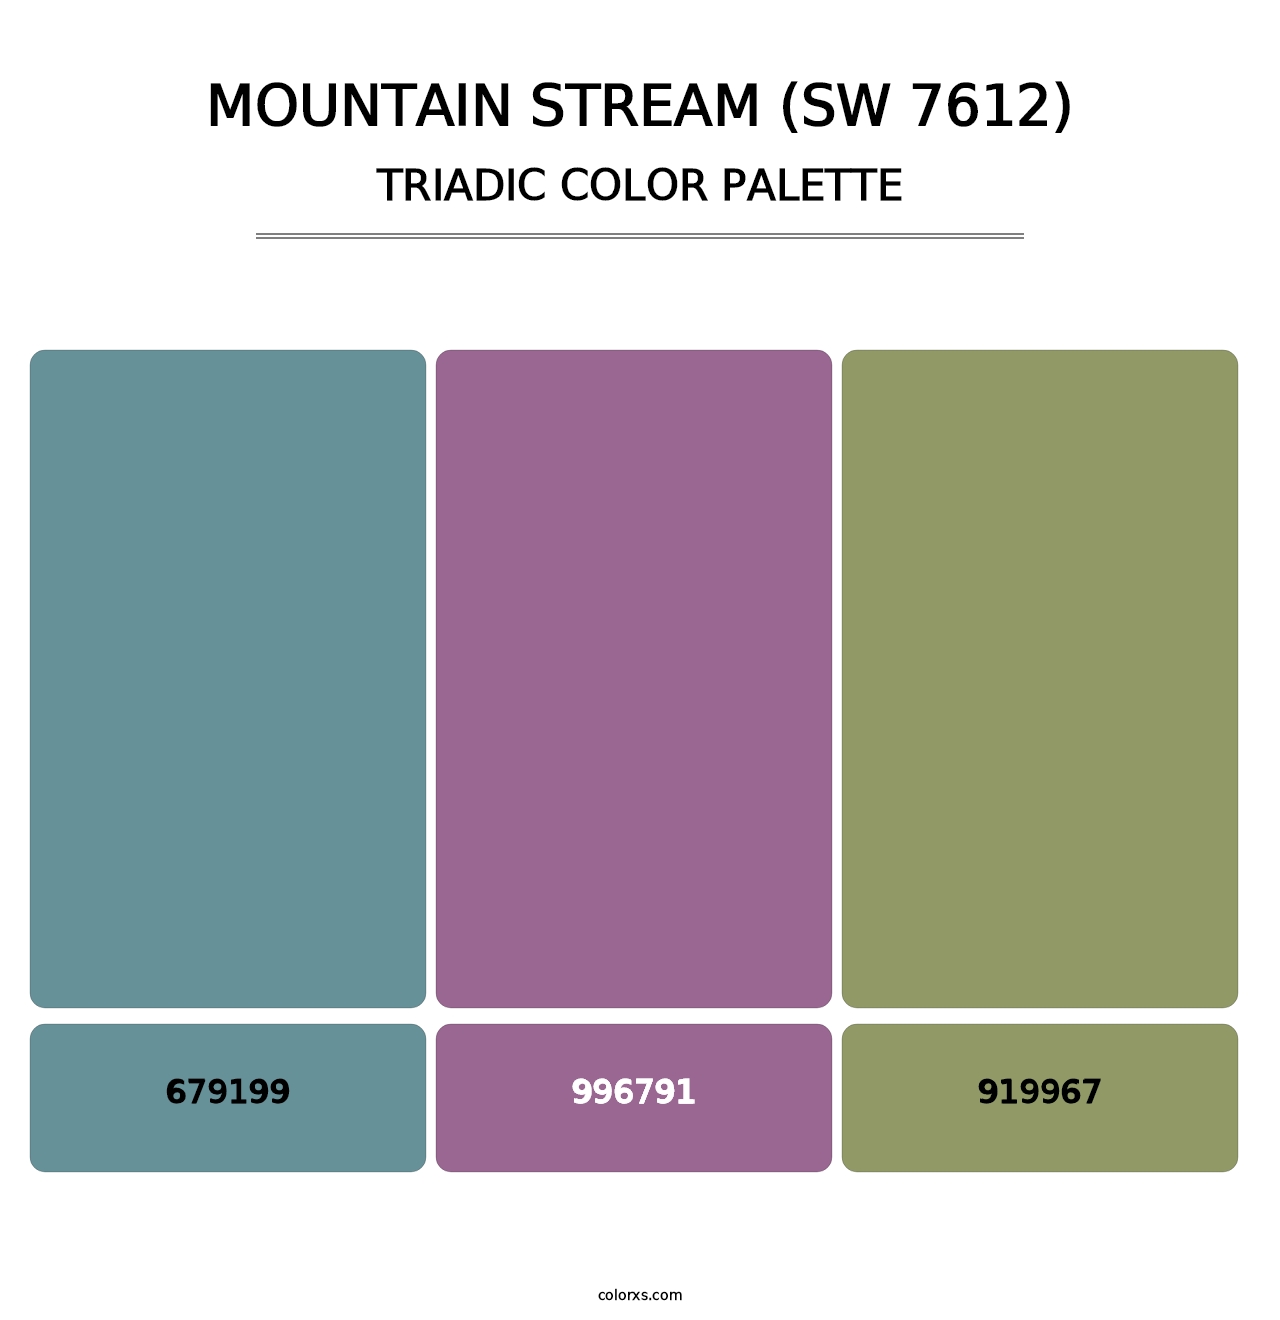 Mountain Stream (SW 7612) - Triadic Color Palette